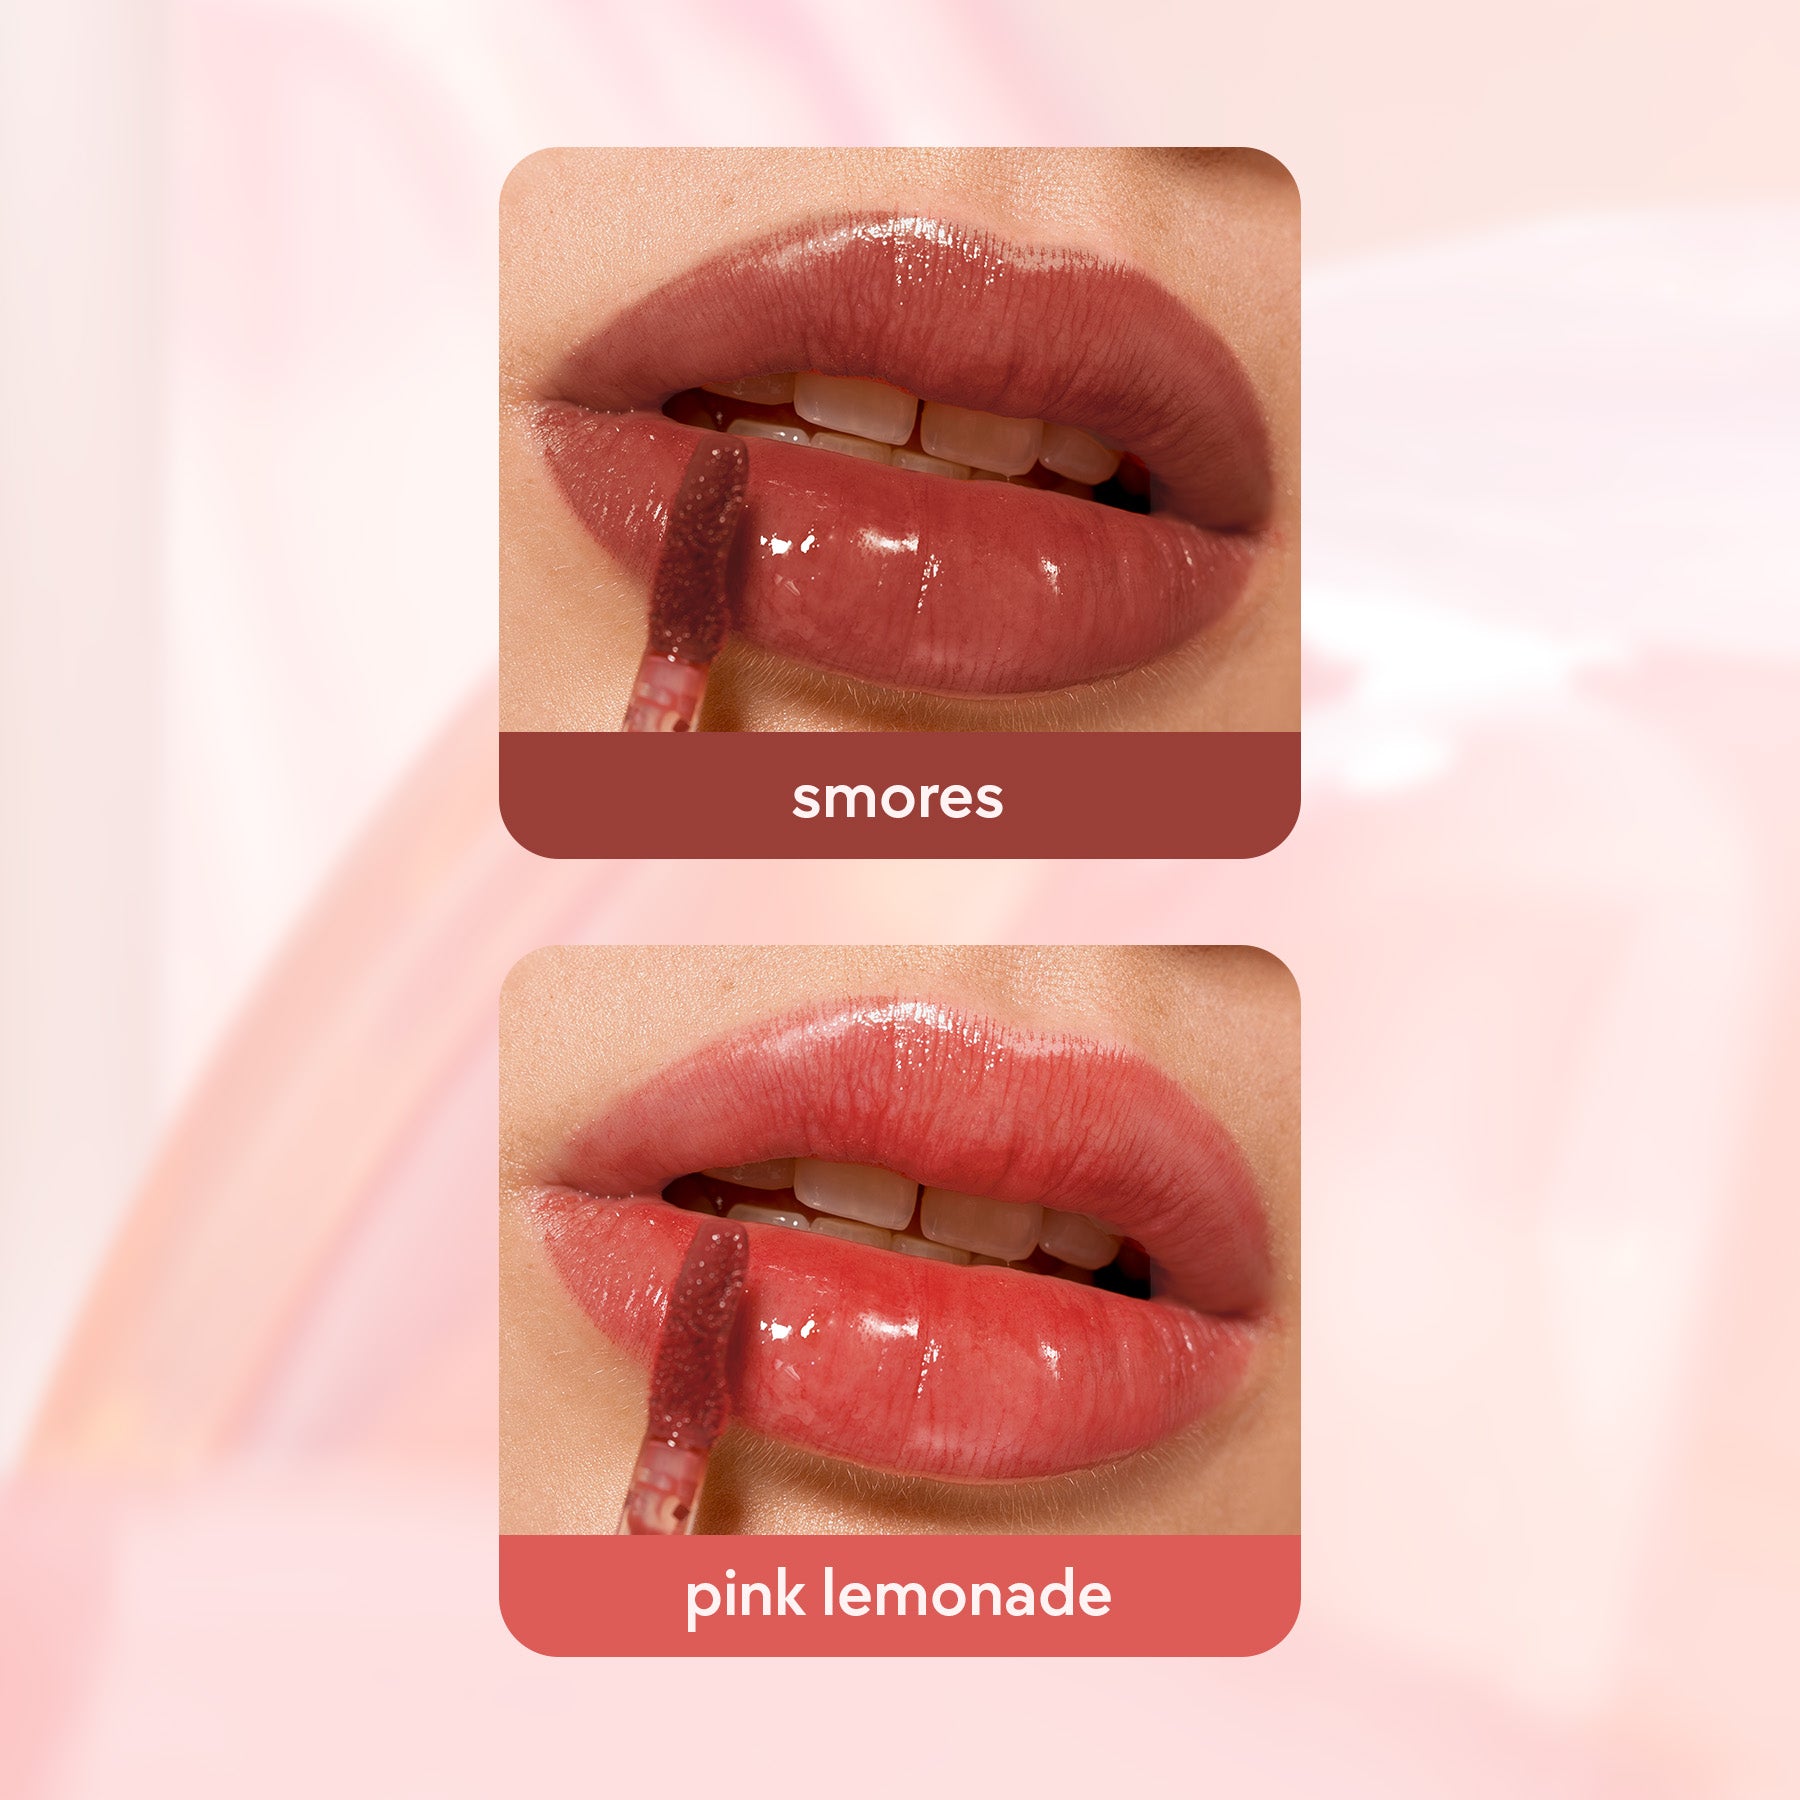 Happy Skin Lip Jelly Duo in Smores and Pink Lemonade